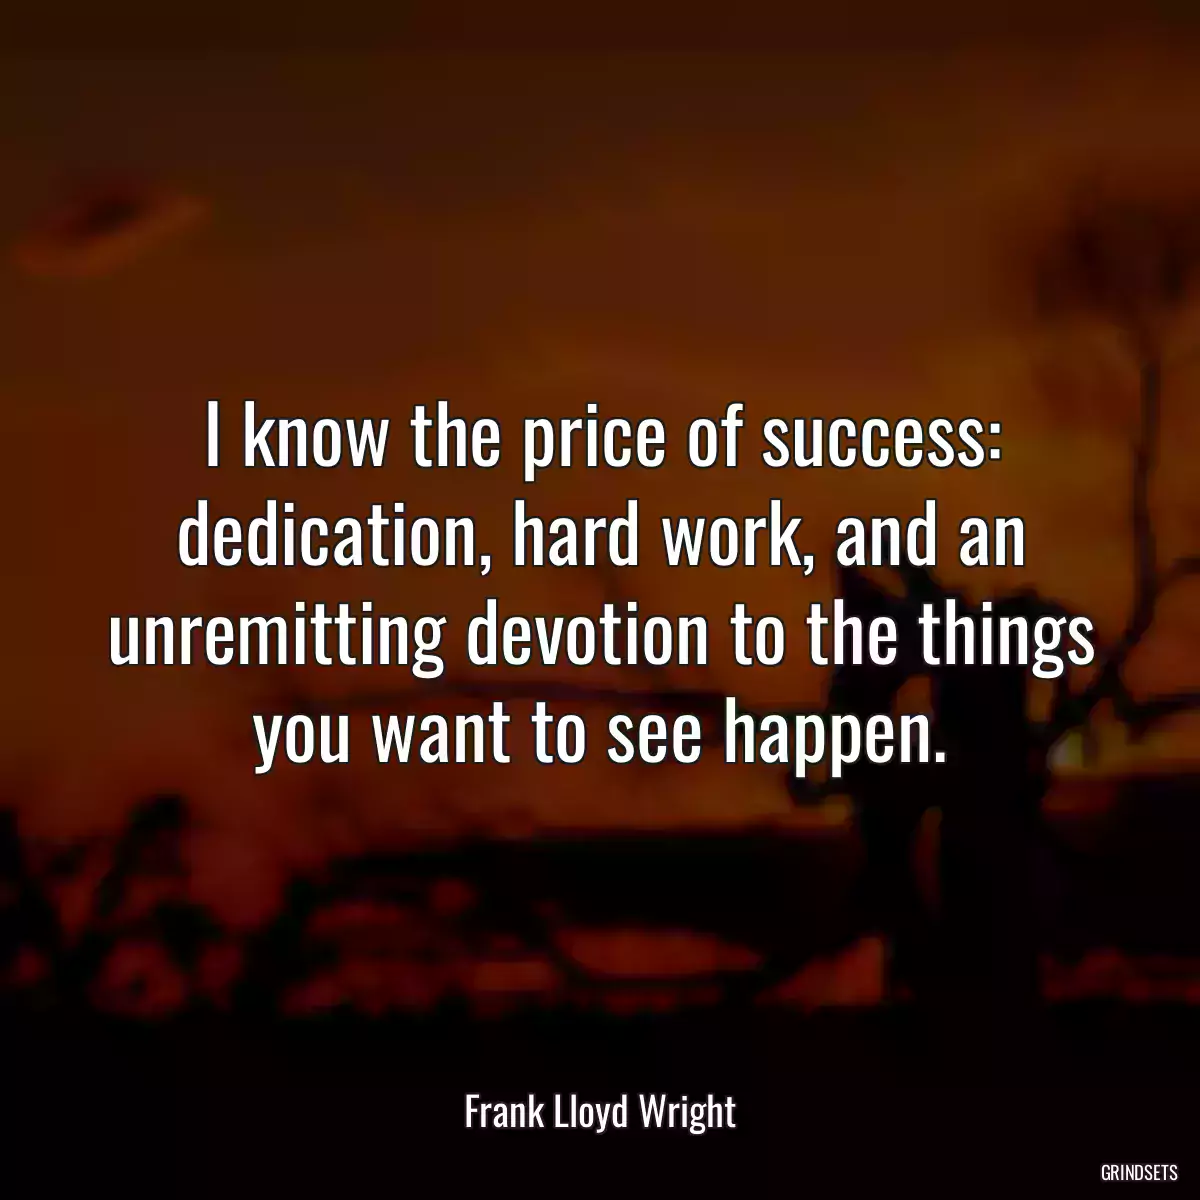 I know the price of success: dedication, hard work, and an unremitting devotion to the things you want to see happen.